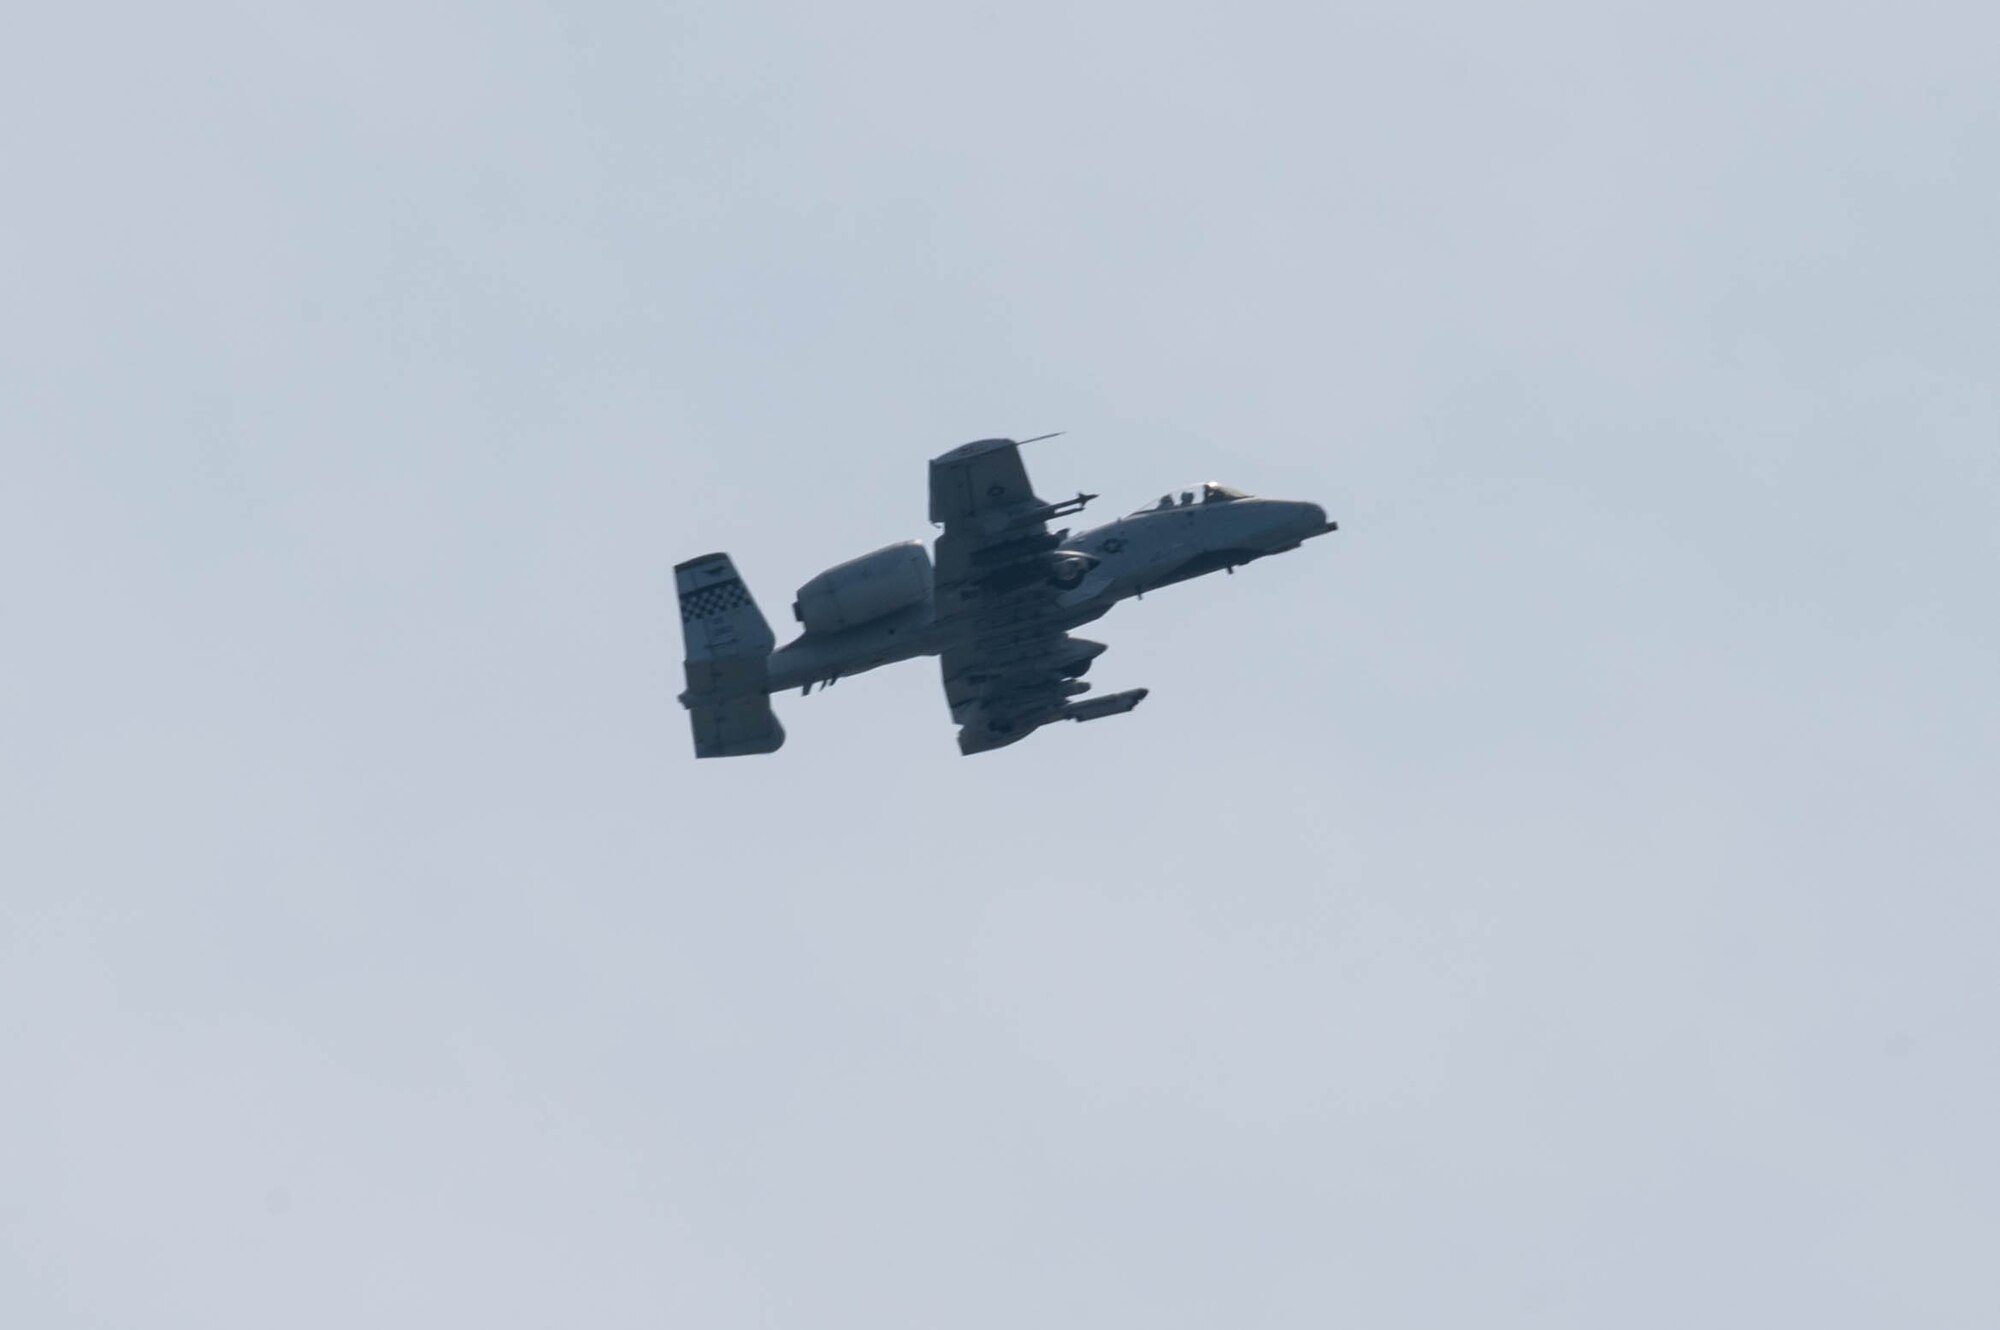 A-10 Thunderbolt II “Warthog” takes off from Osan Air Base